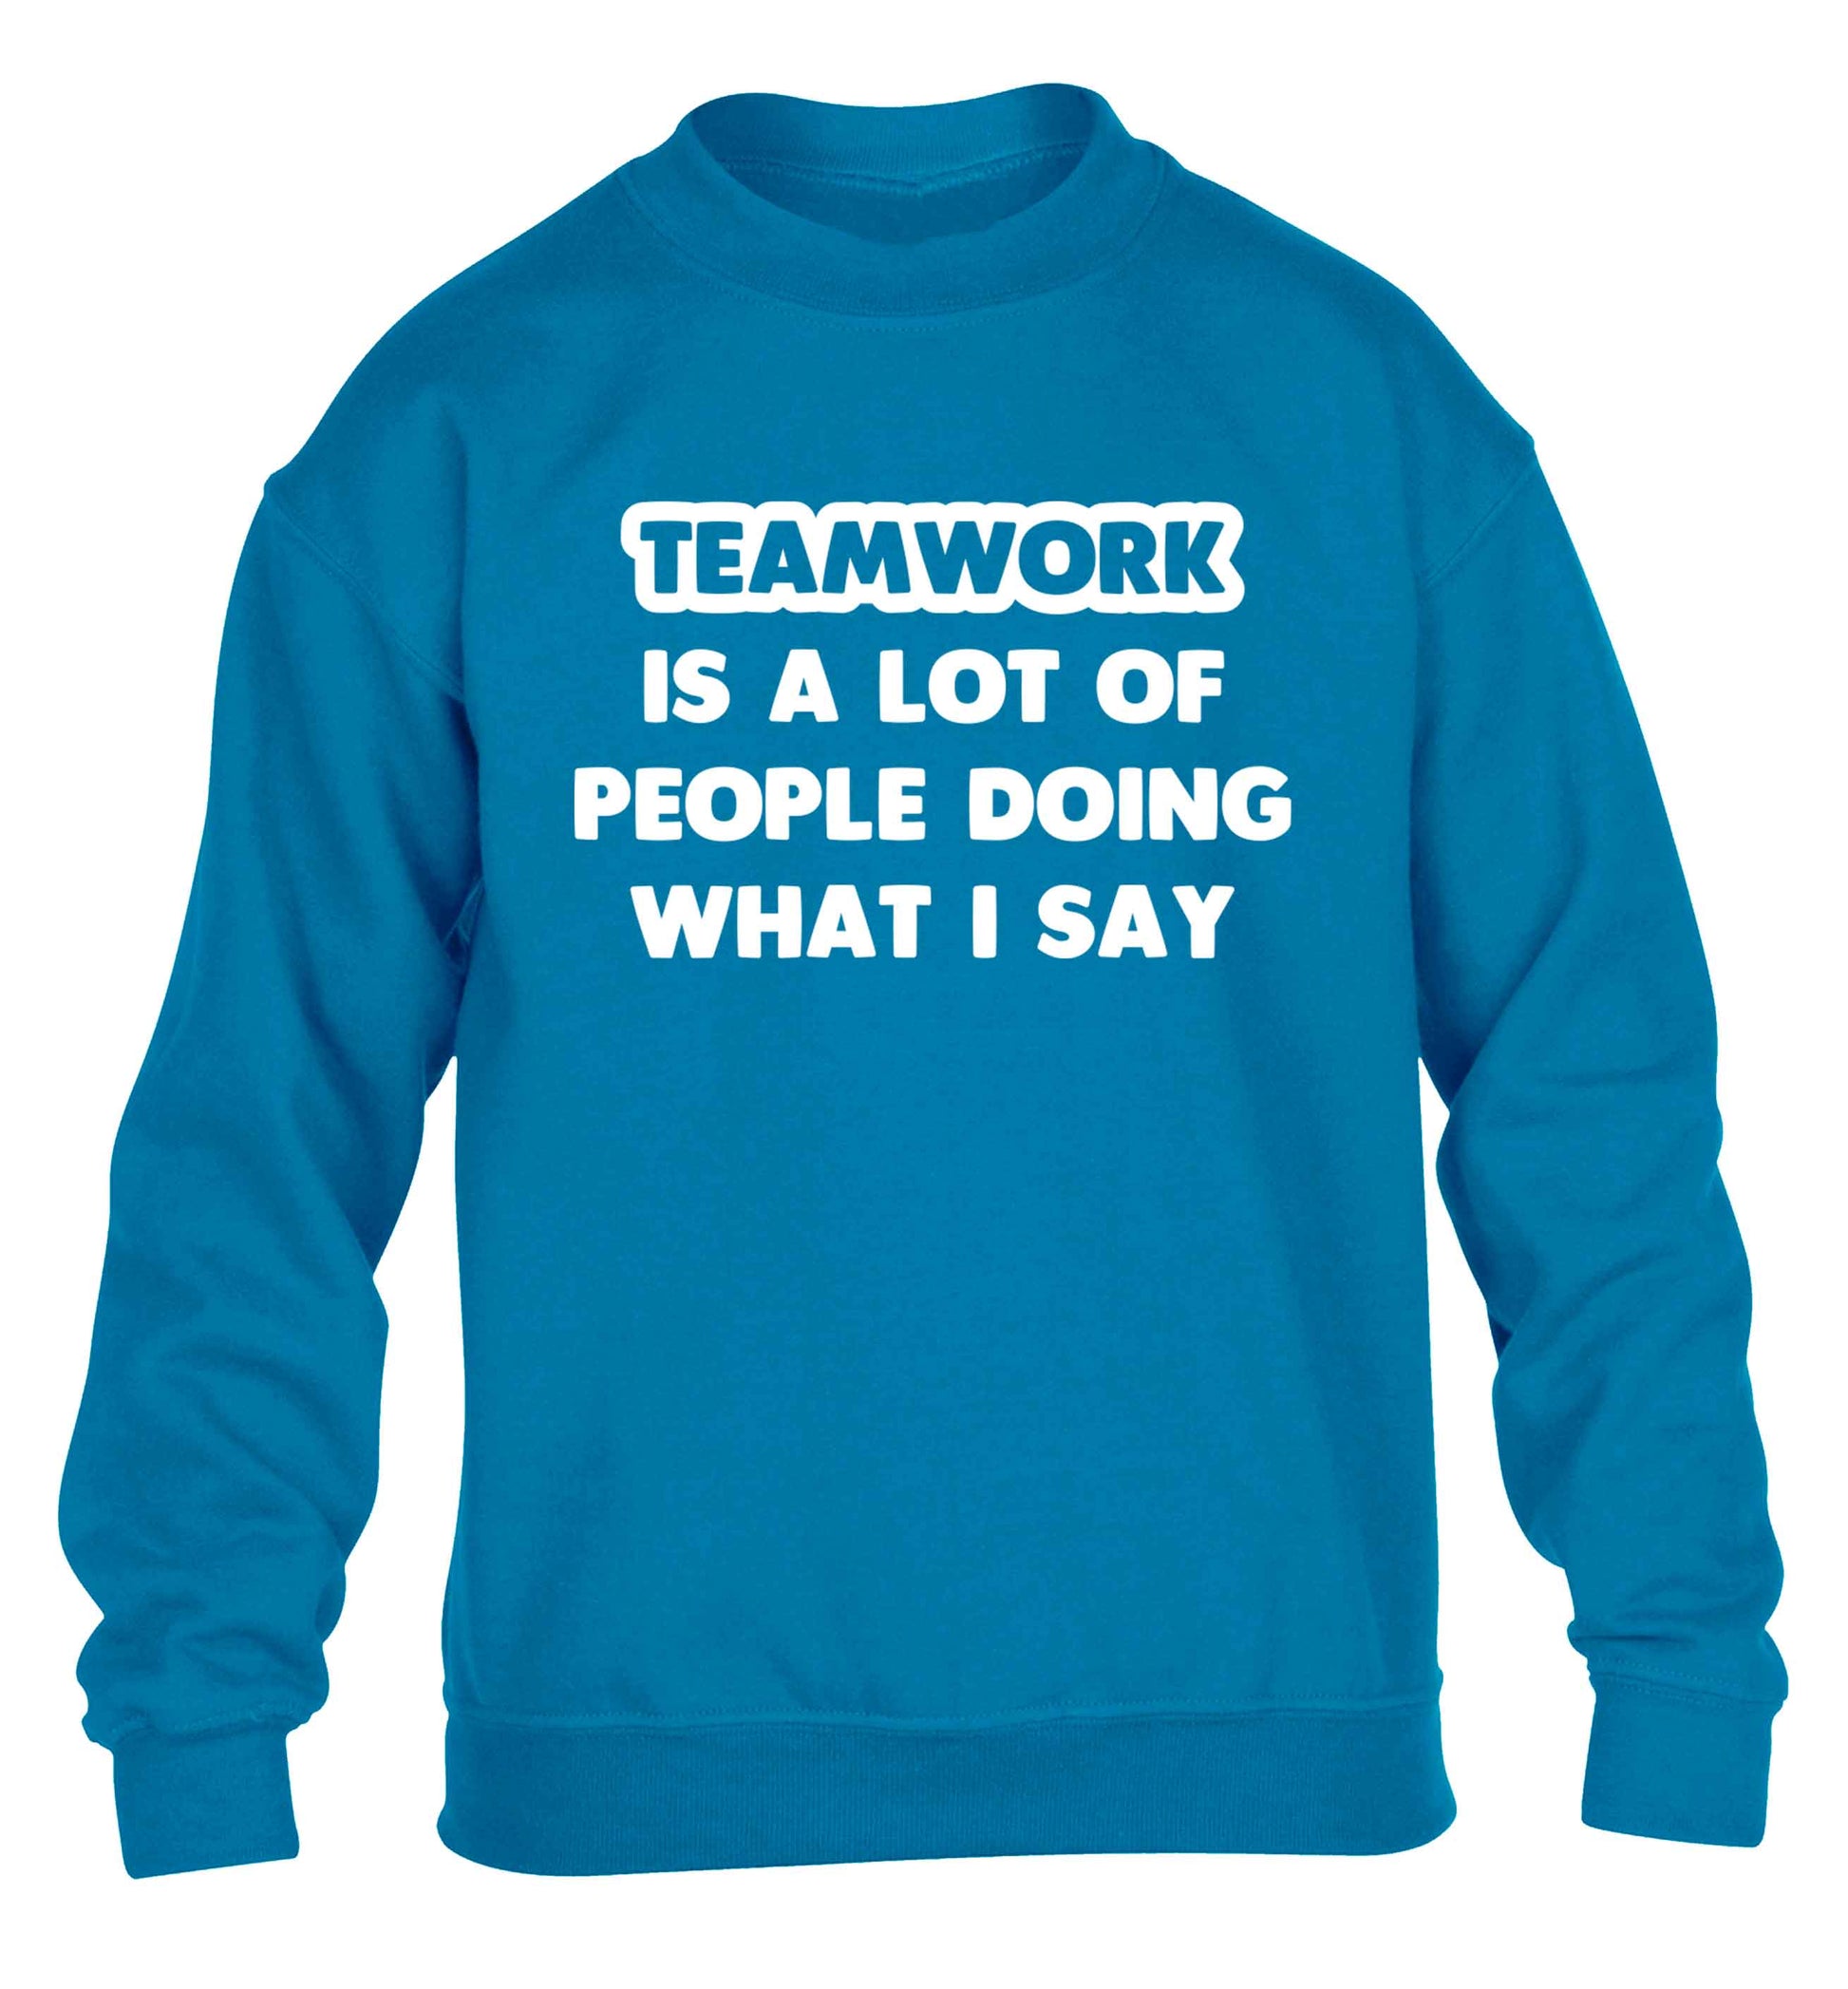 Teamwork is a lot of people doing what I say children's blue sweater 12-13 Years